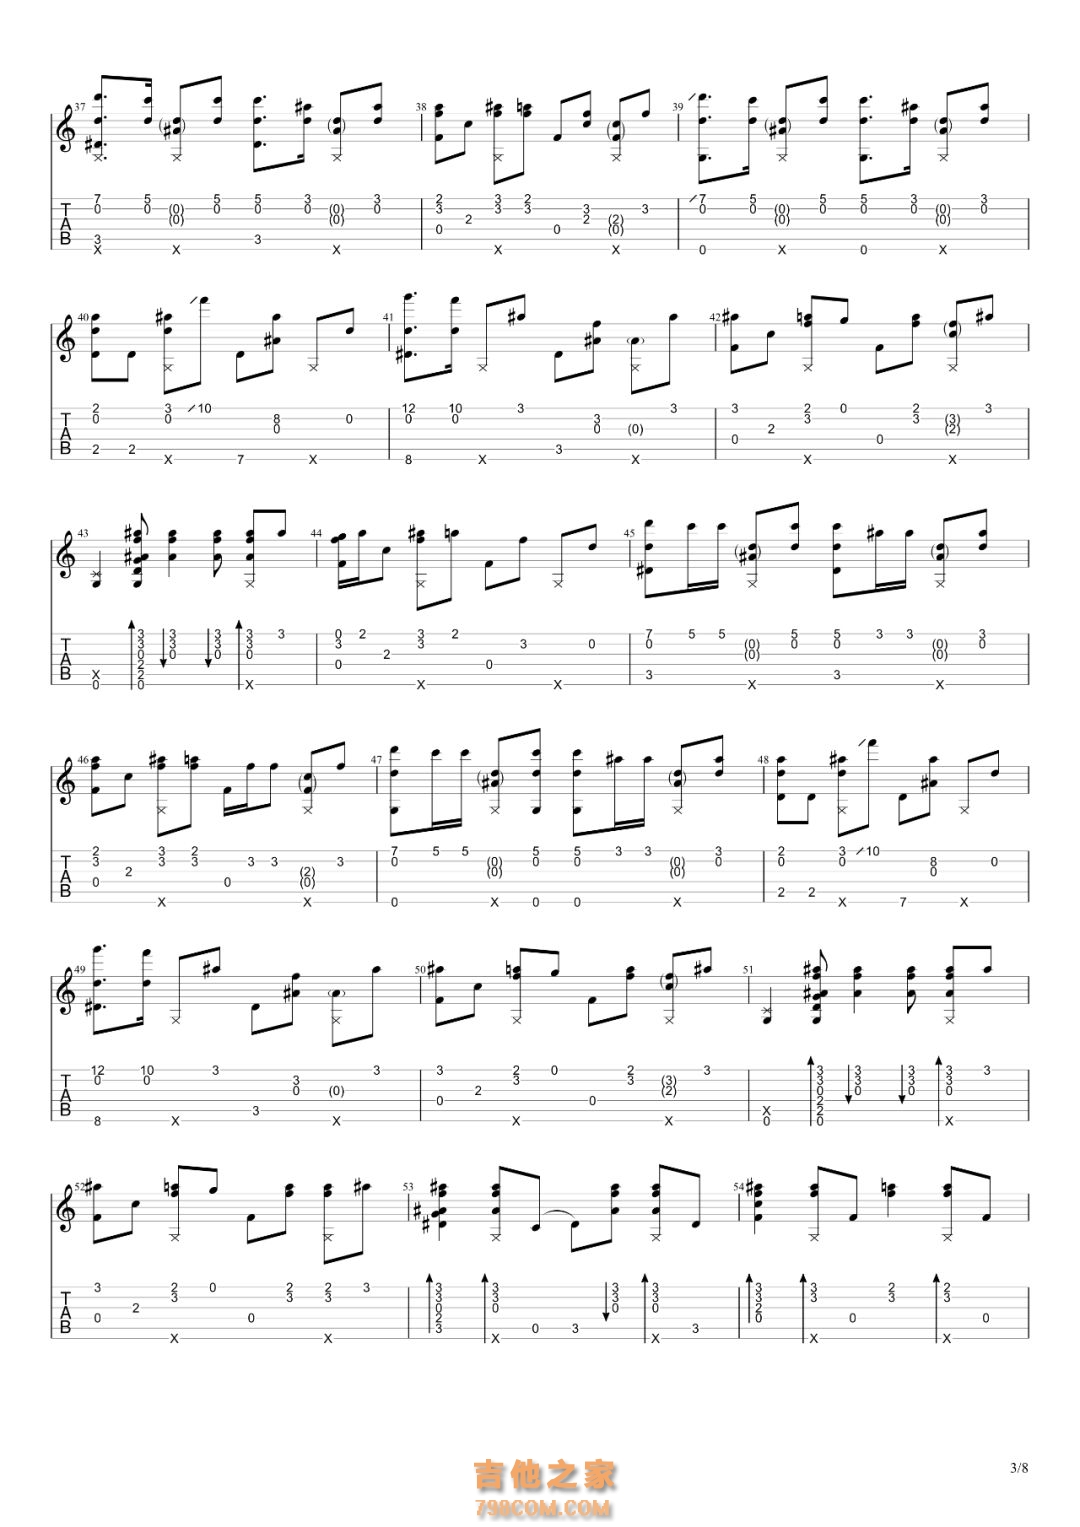 Unravel - Sheet music for Acoustic Guitar